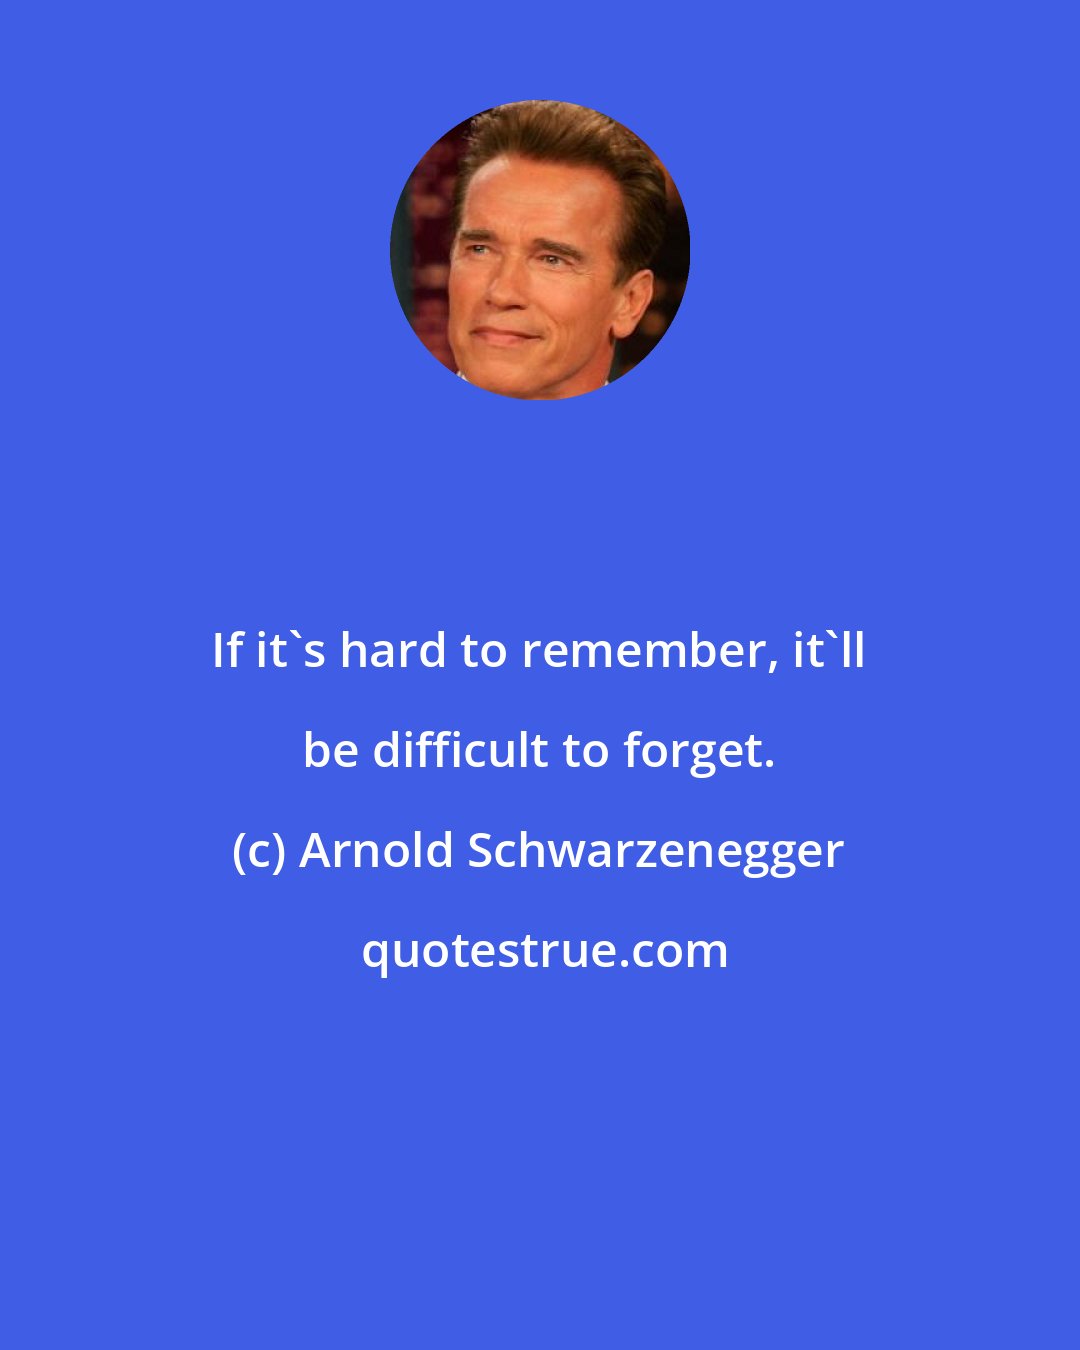 Arnold Schwarzenegger: If it's hard to remember, it'll be difficult to forget.